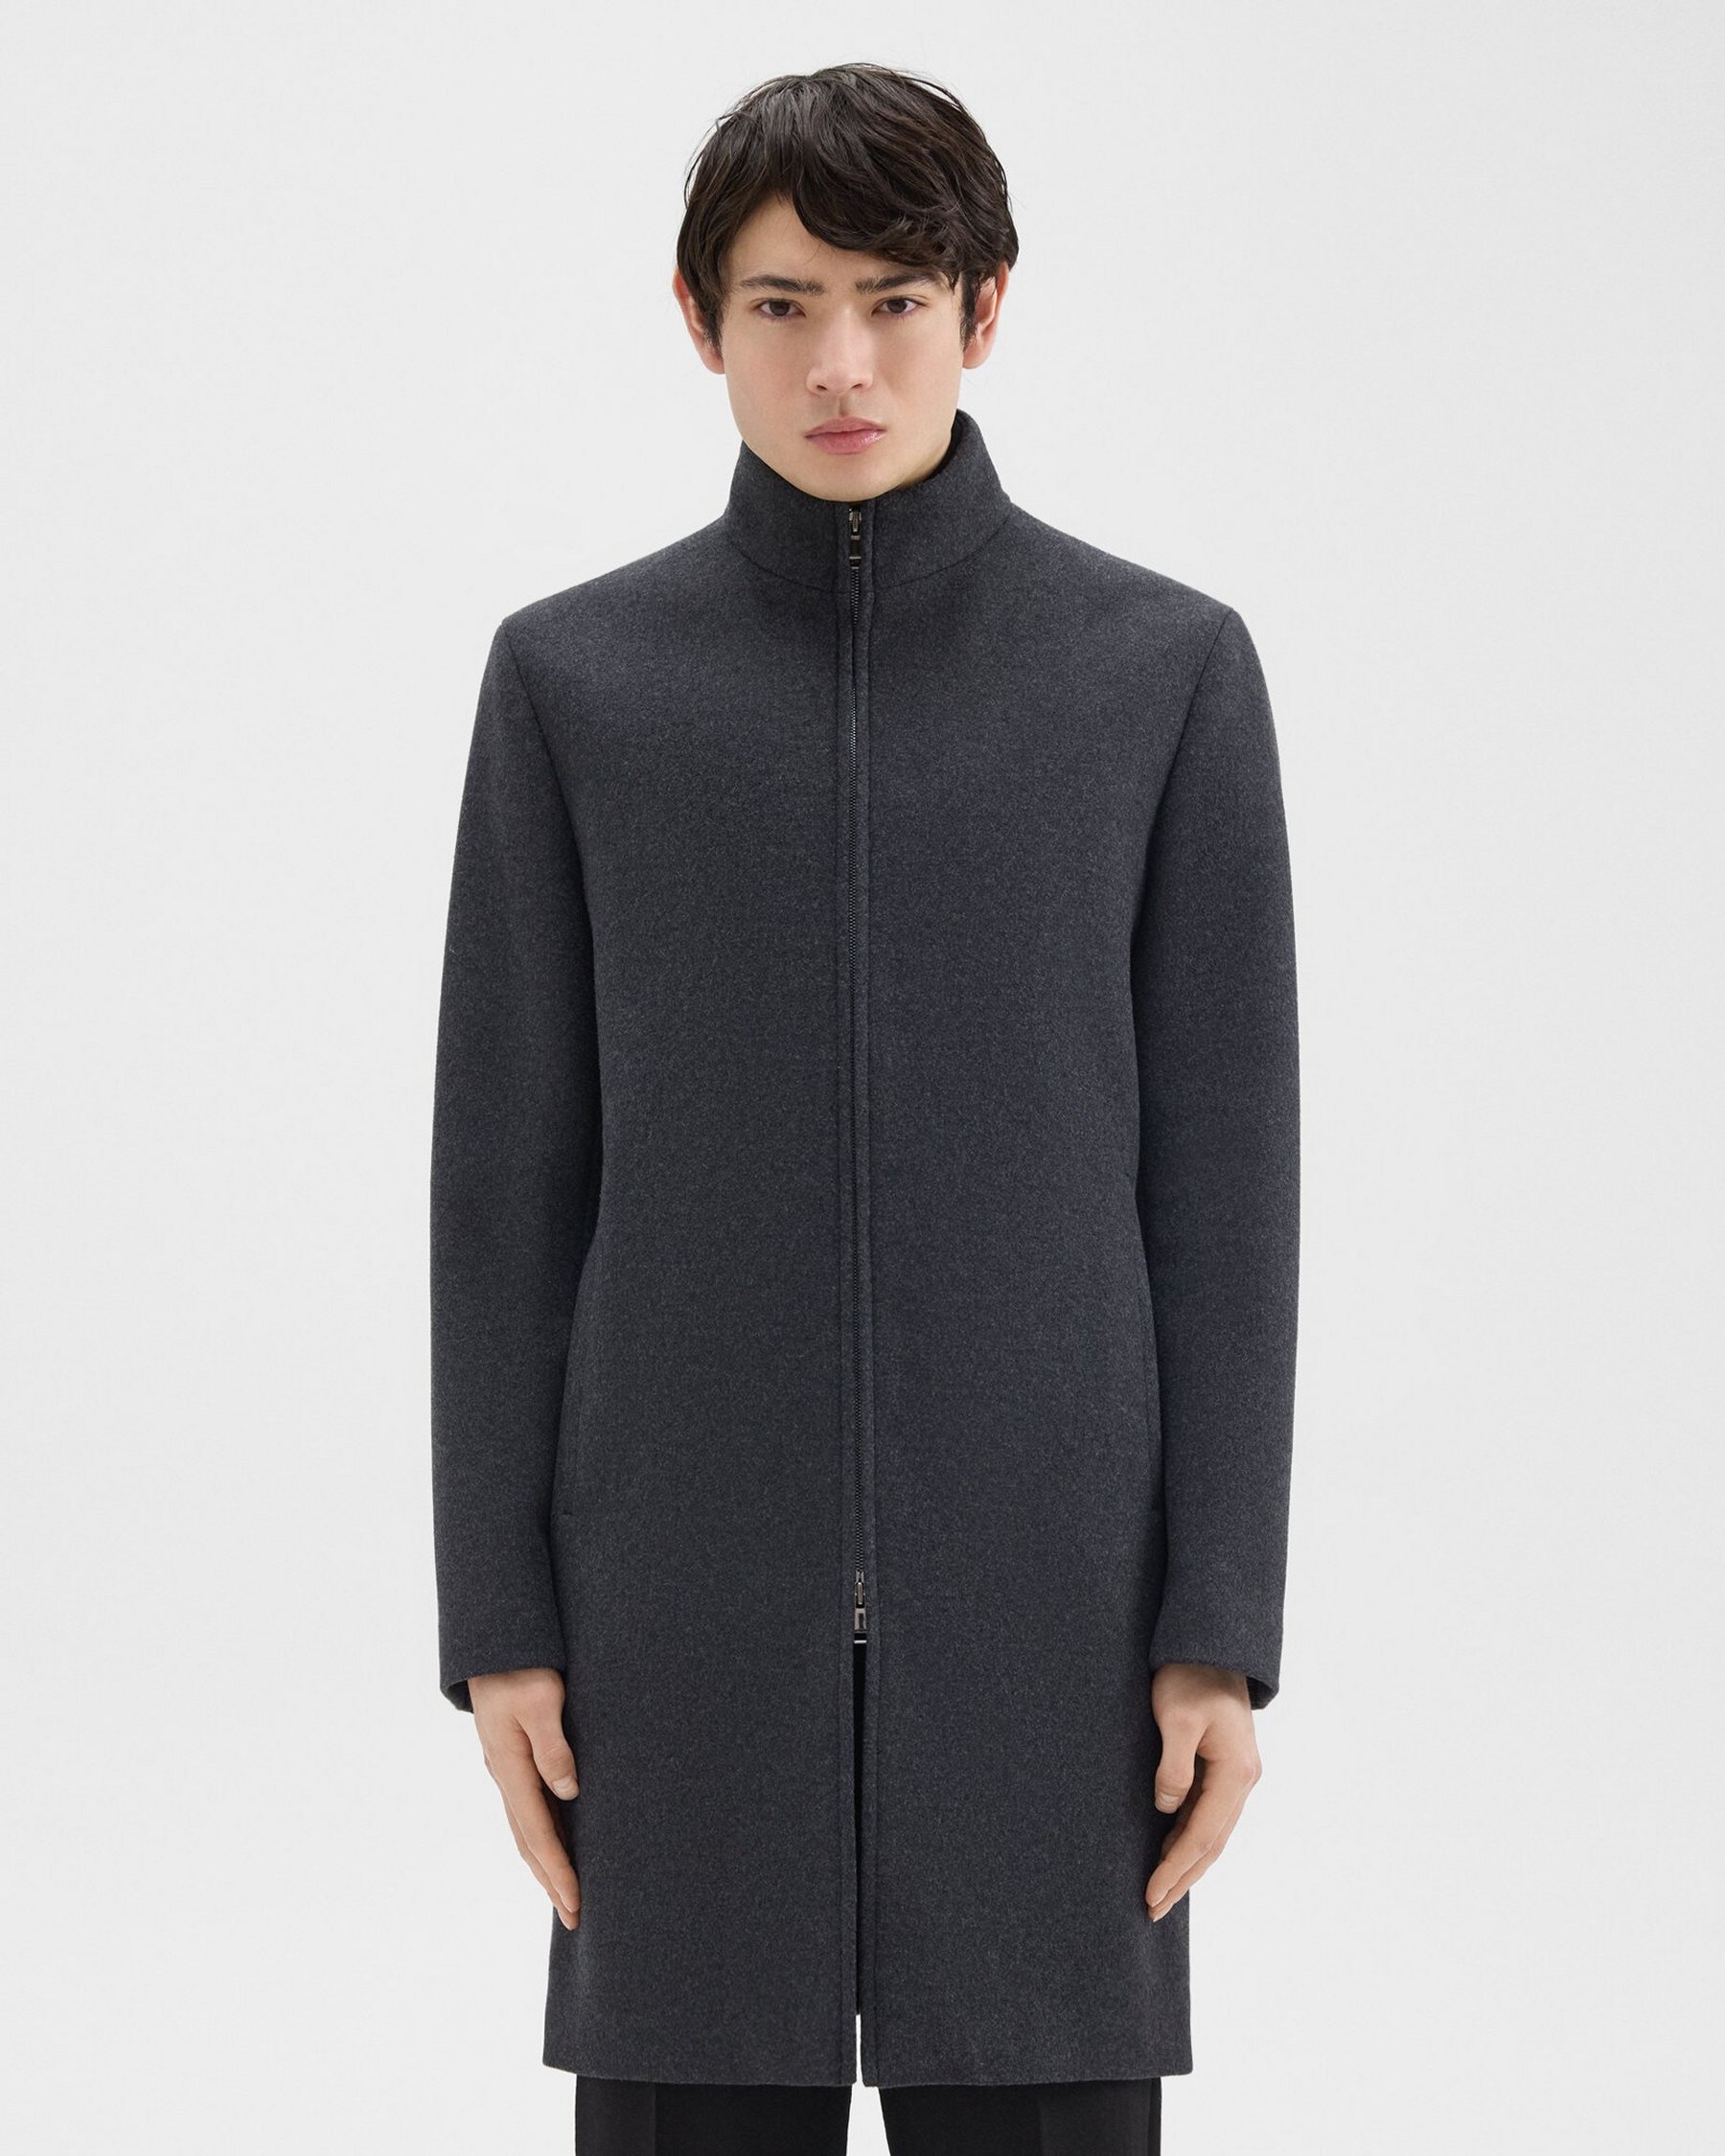 Theory Belvin Coat in Recycled Wool-Blend Melton